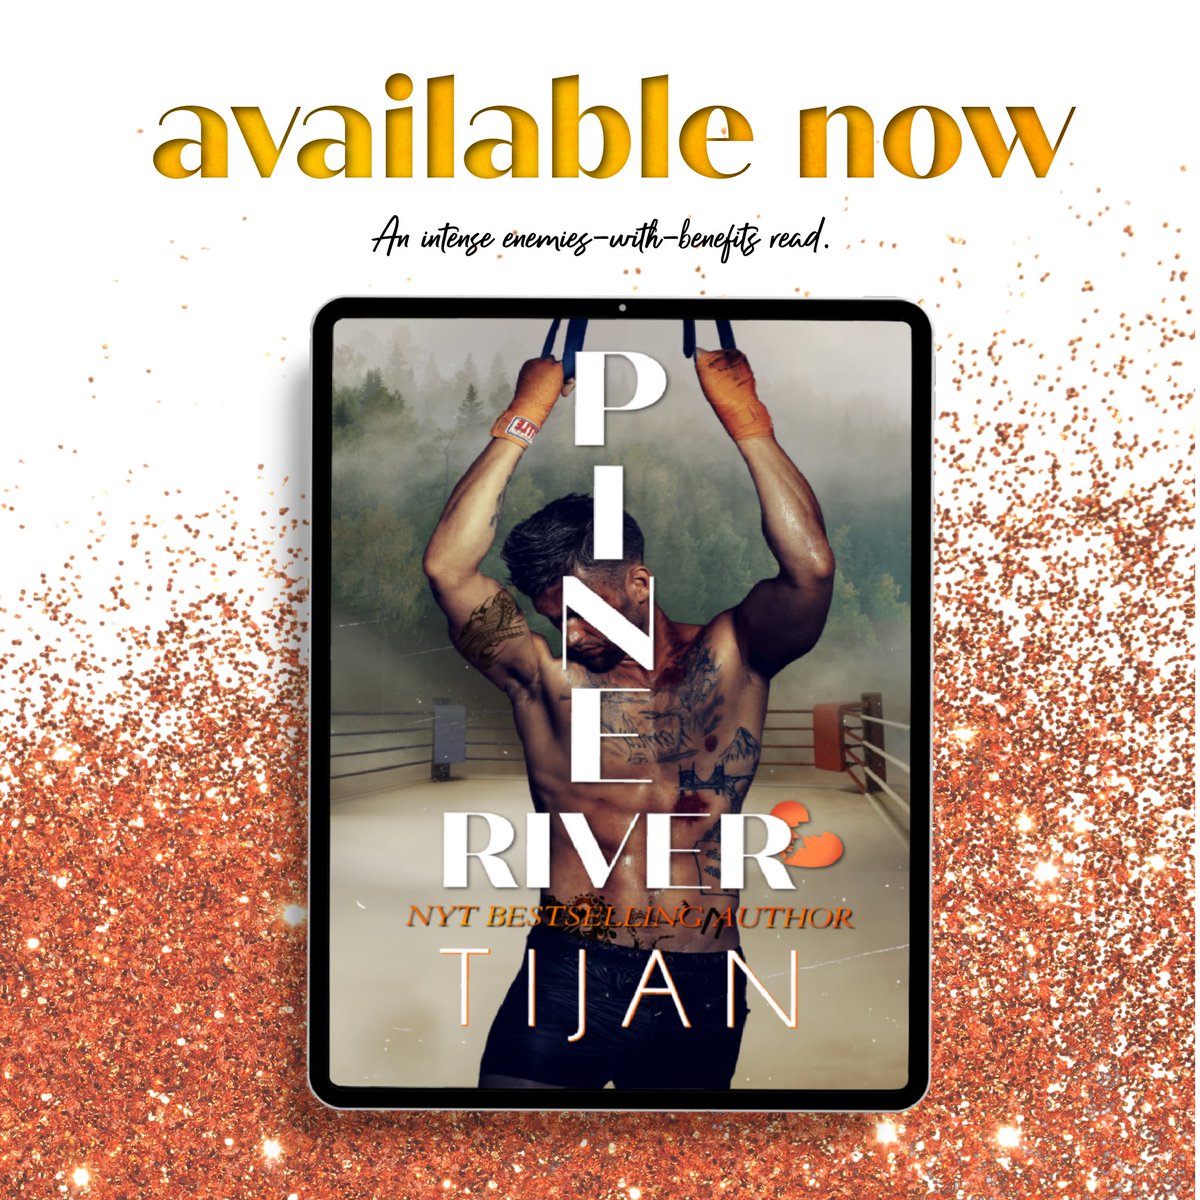 Pine River by @tijansbooks is now LIVE!
Download today or read FREE in #kindleunlimited
 bit.ly/3Fp6nam

#cousinsbestfriend #tijan #matureyoungadult #jadedwithbenefits #secretbillionaire #triplets #overprotectivecousins #enemieswithbenefits #valentineprlm @valentine_pr_